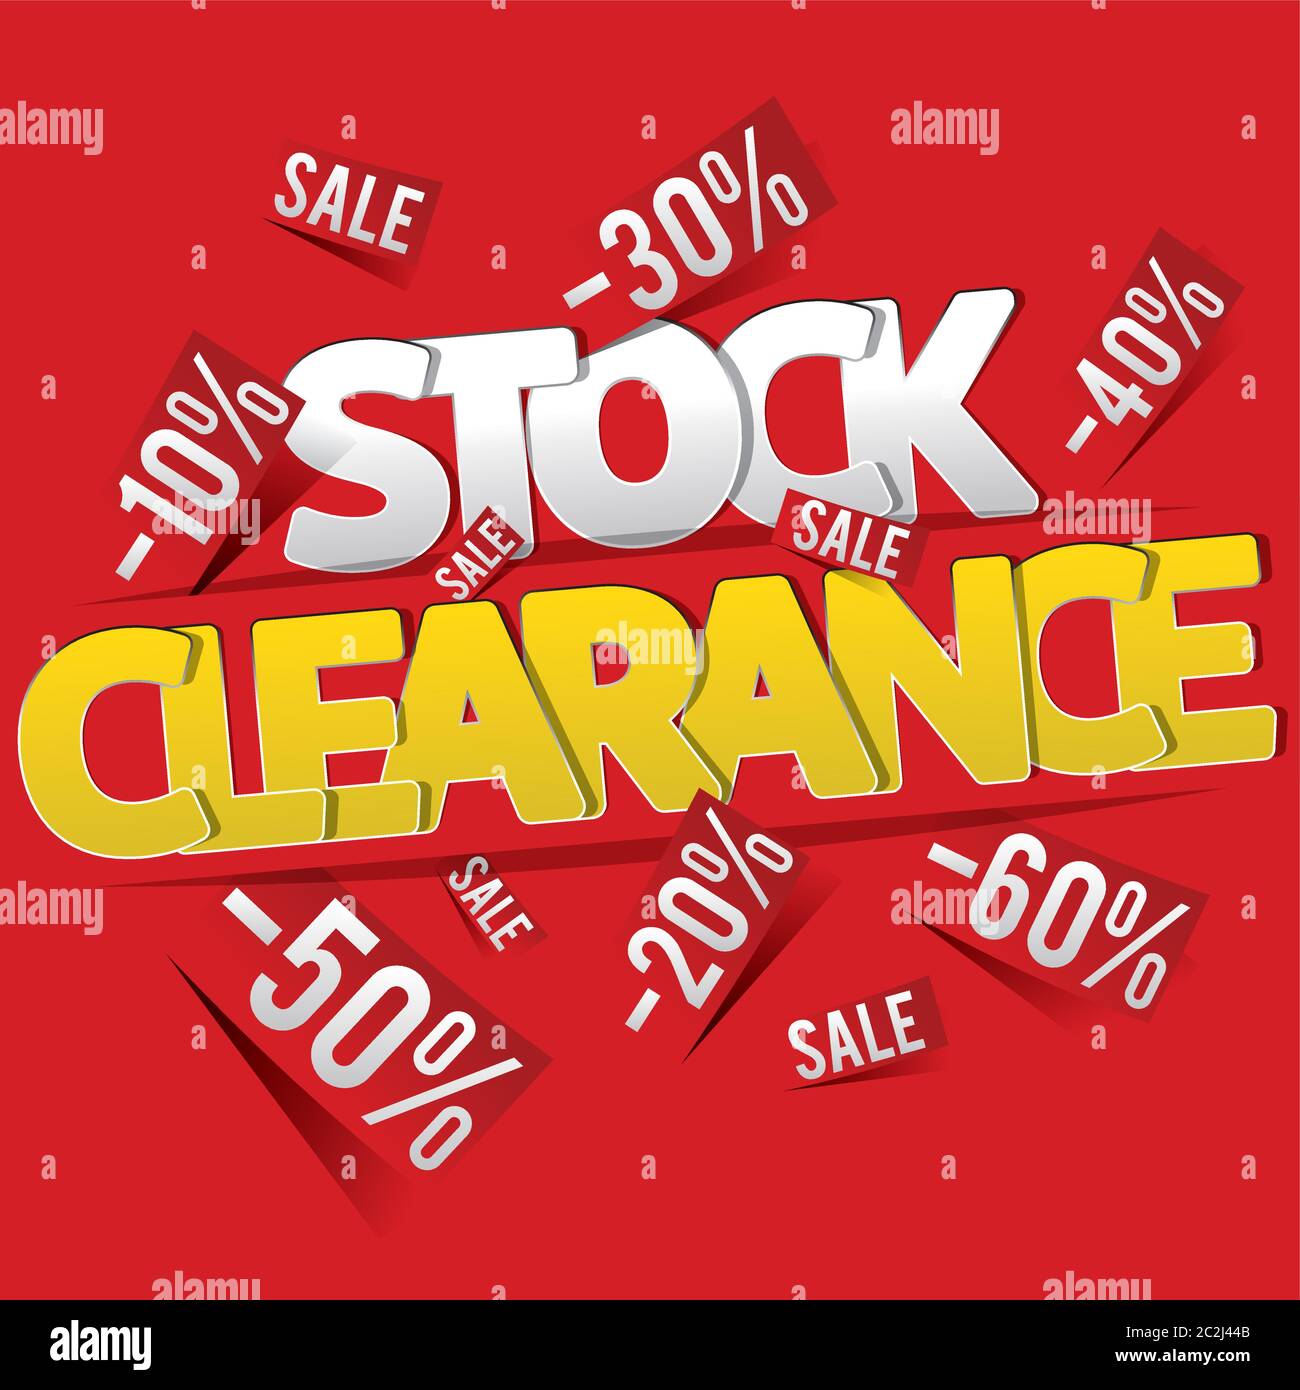 Red Clearance Sale Poster Template